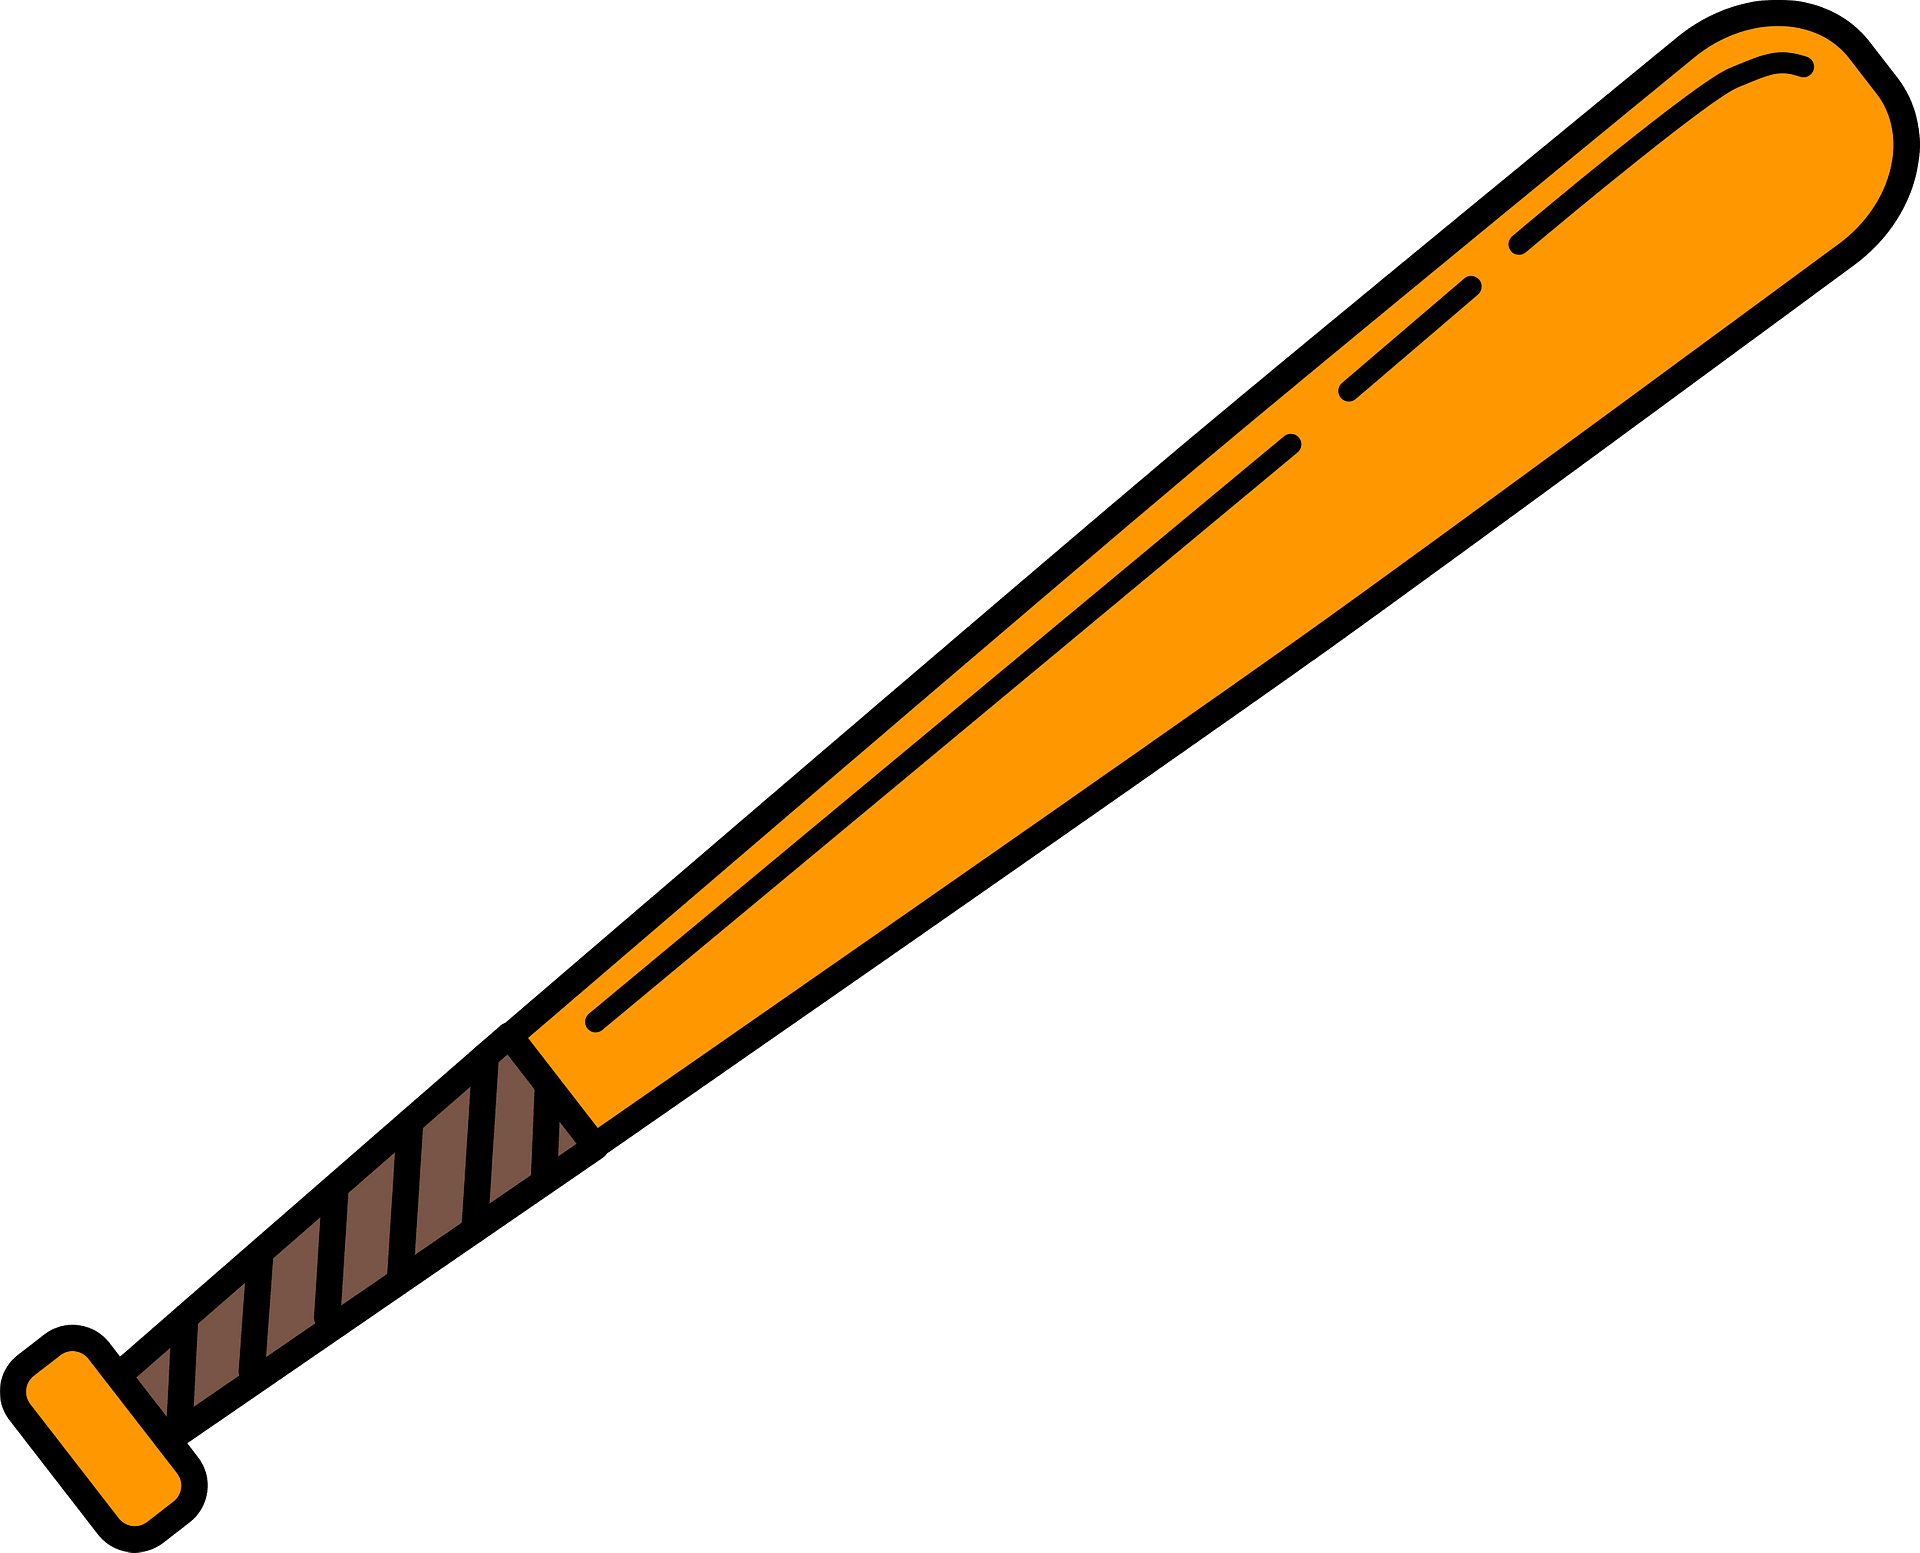 Baseball Bat and Ball Clipart Graphic by Drumpee Design · Creative ...